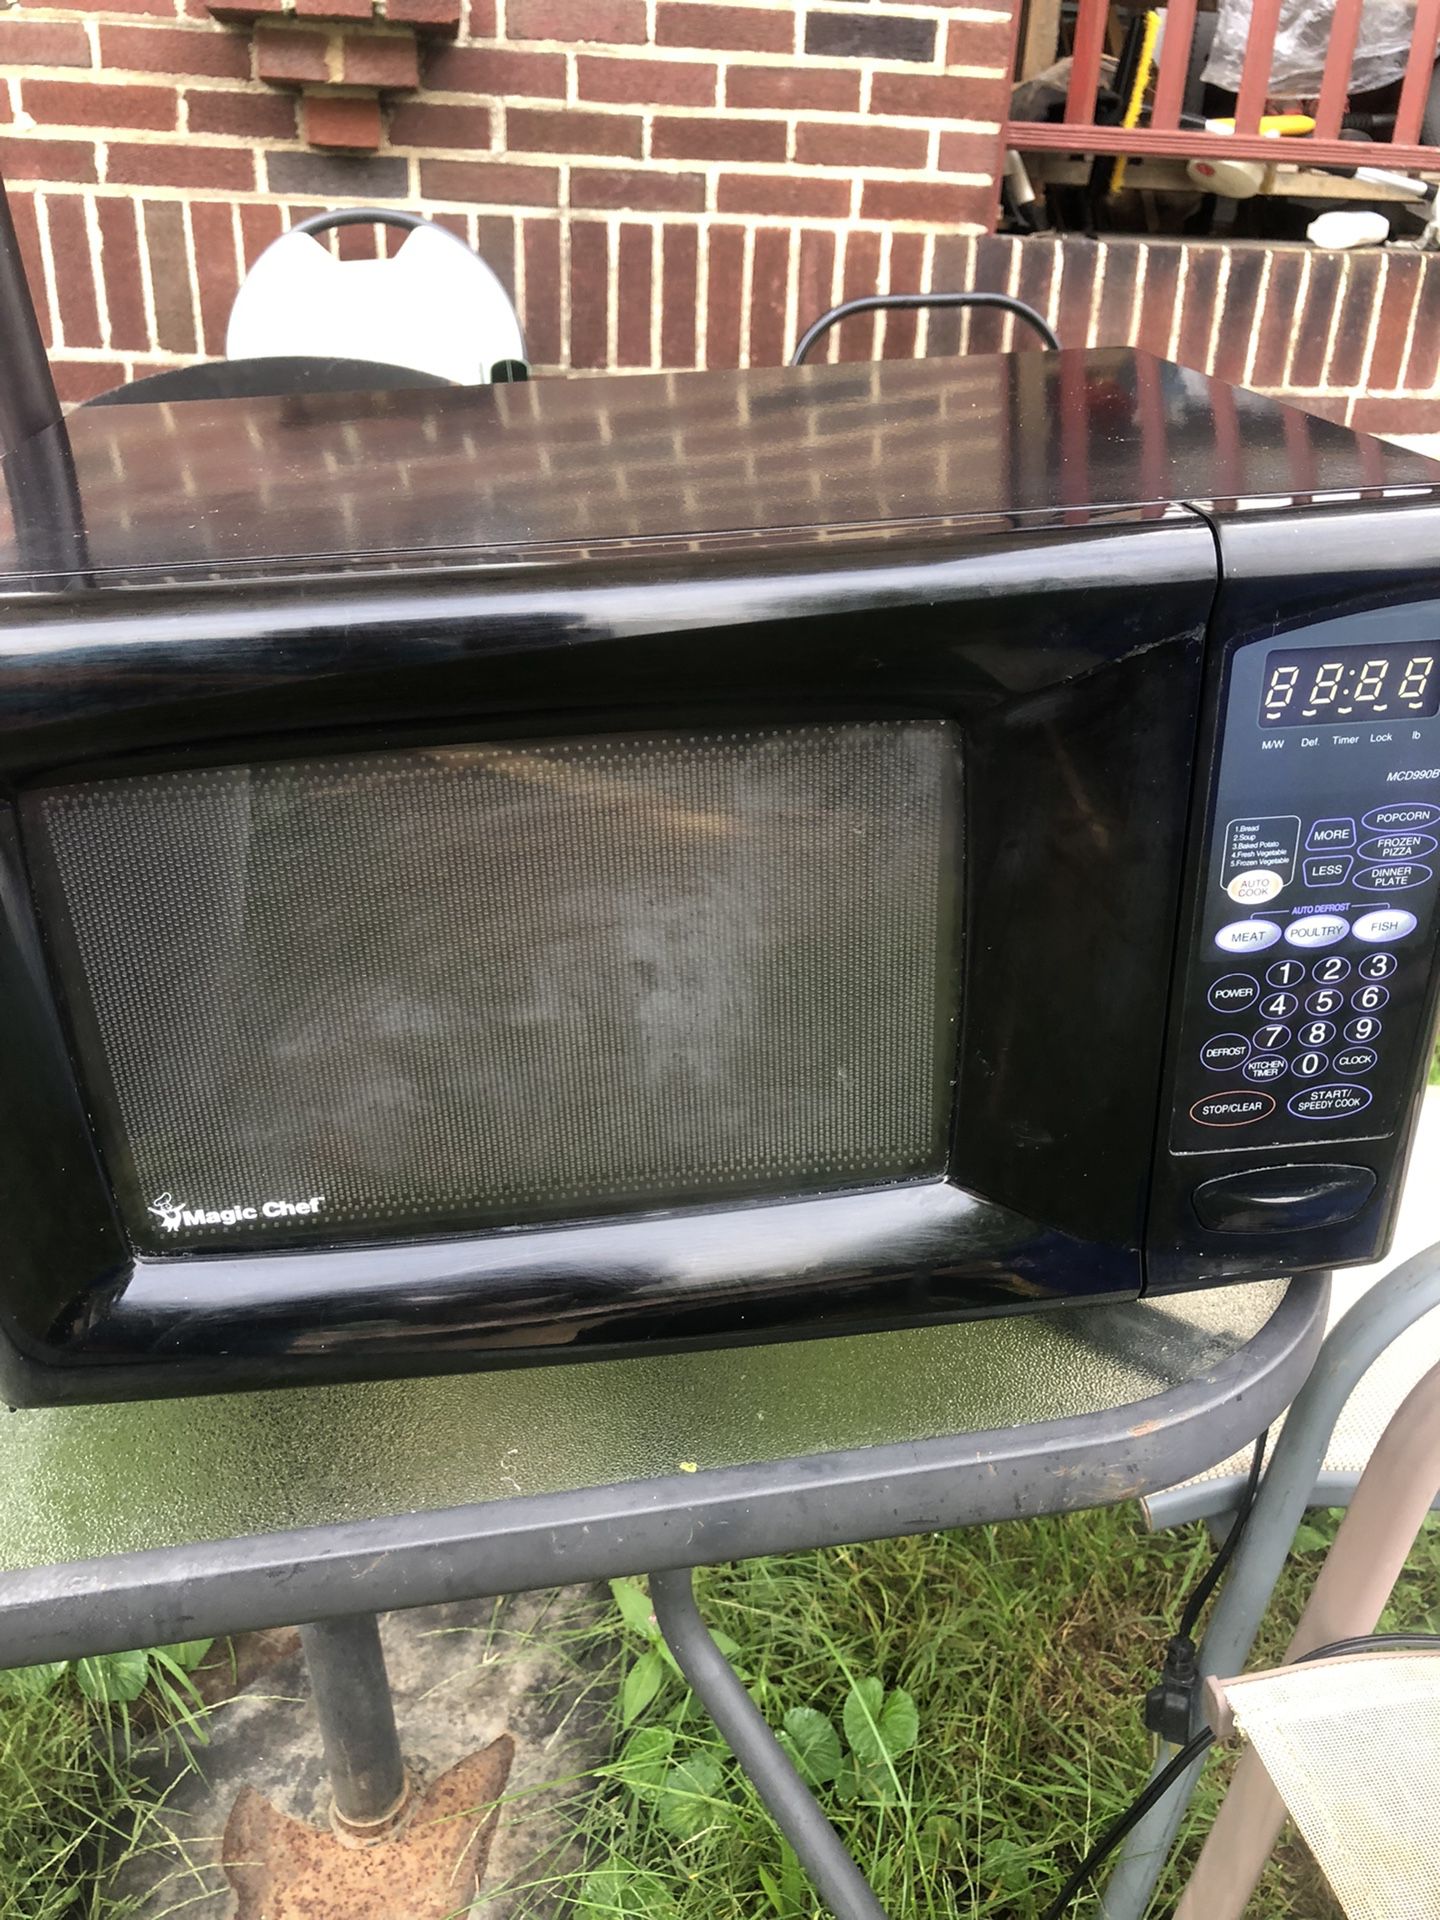 Very Good Condition Magic Chef Microwave 